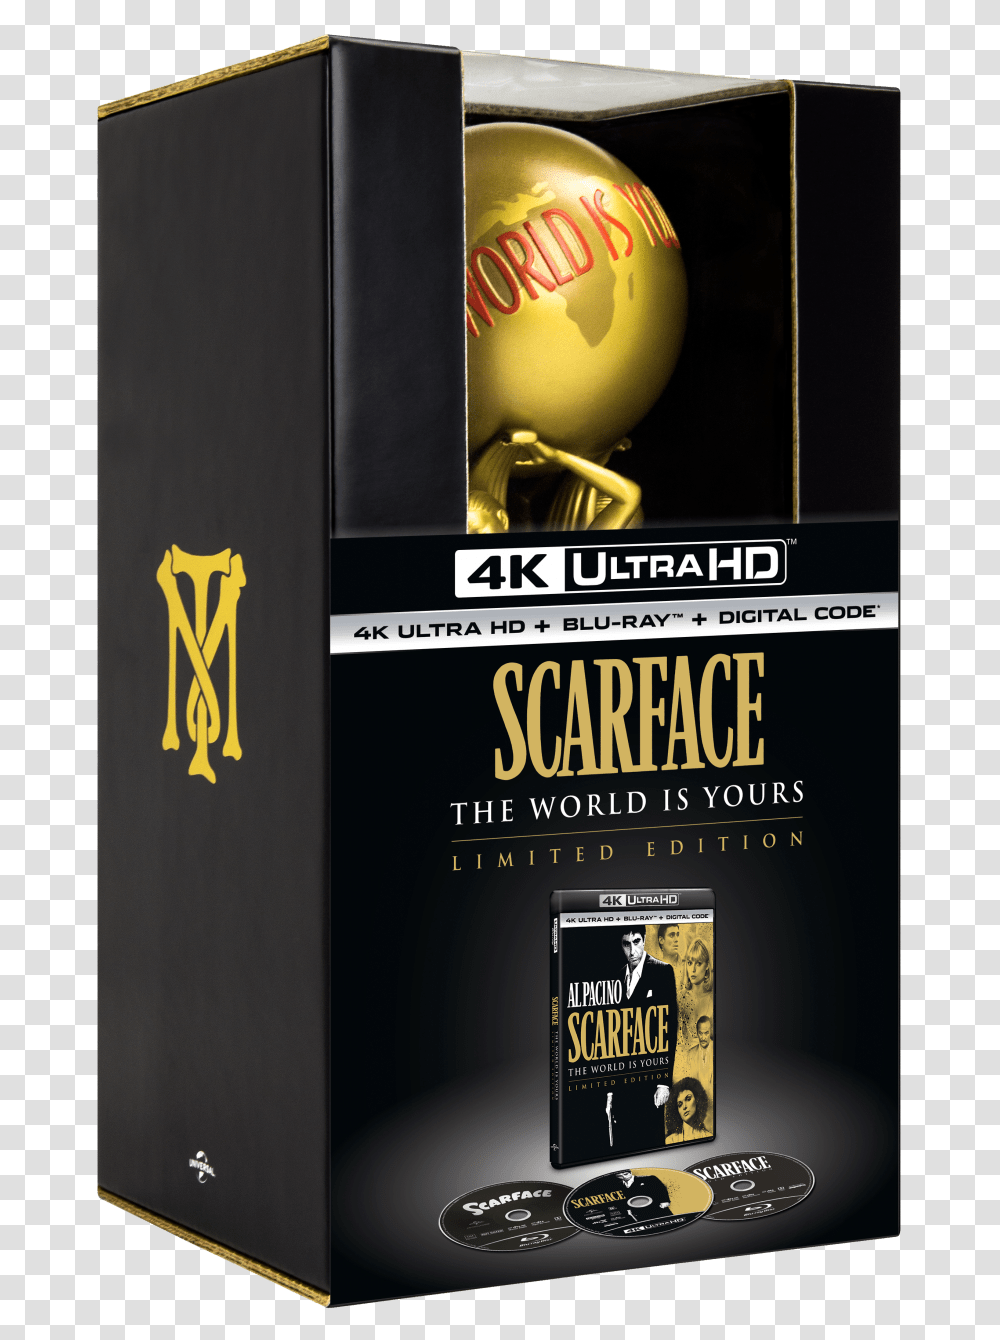 Scarface The World Is Yours 4k Ultra Hd Gift Set Scarface 4k Limited Edition, Advertisement, Poster, Mobile Phone Transparent Png